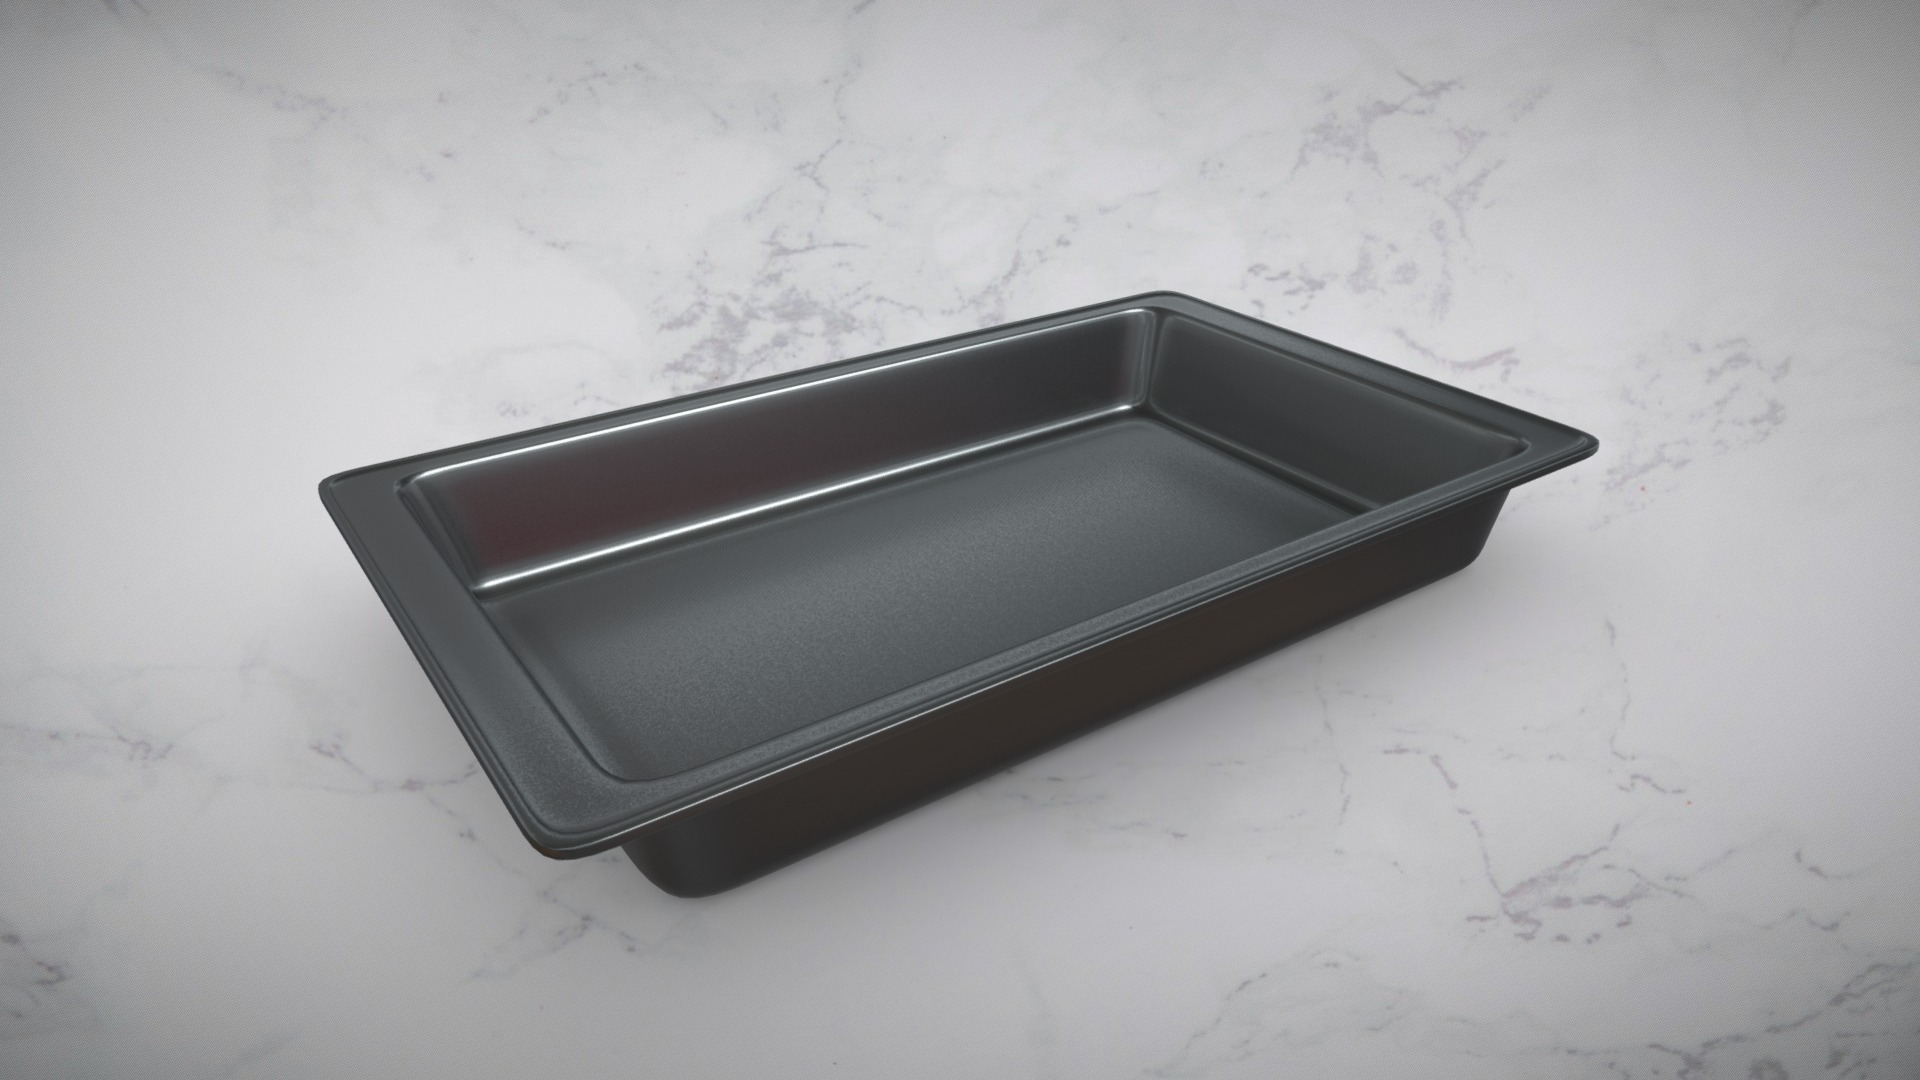 3D model Anodized Aluminum Roasting Pan - This is a 3D model of the Anodized Aluminum Roasting Pan. The 3D model is about a black rectangular object on a white surface.